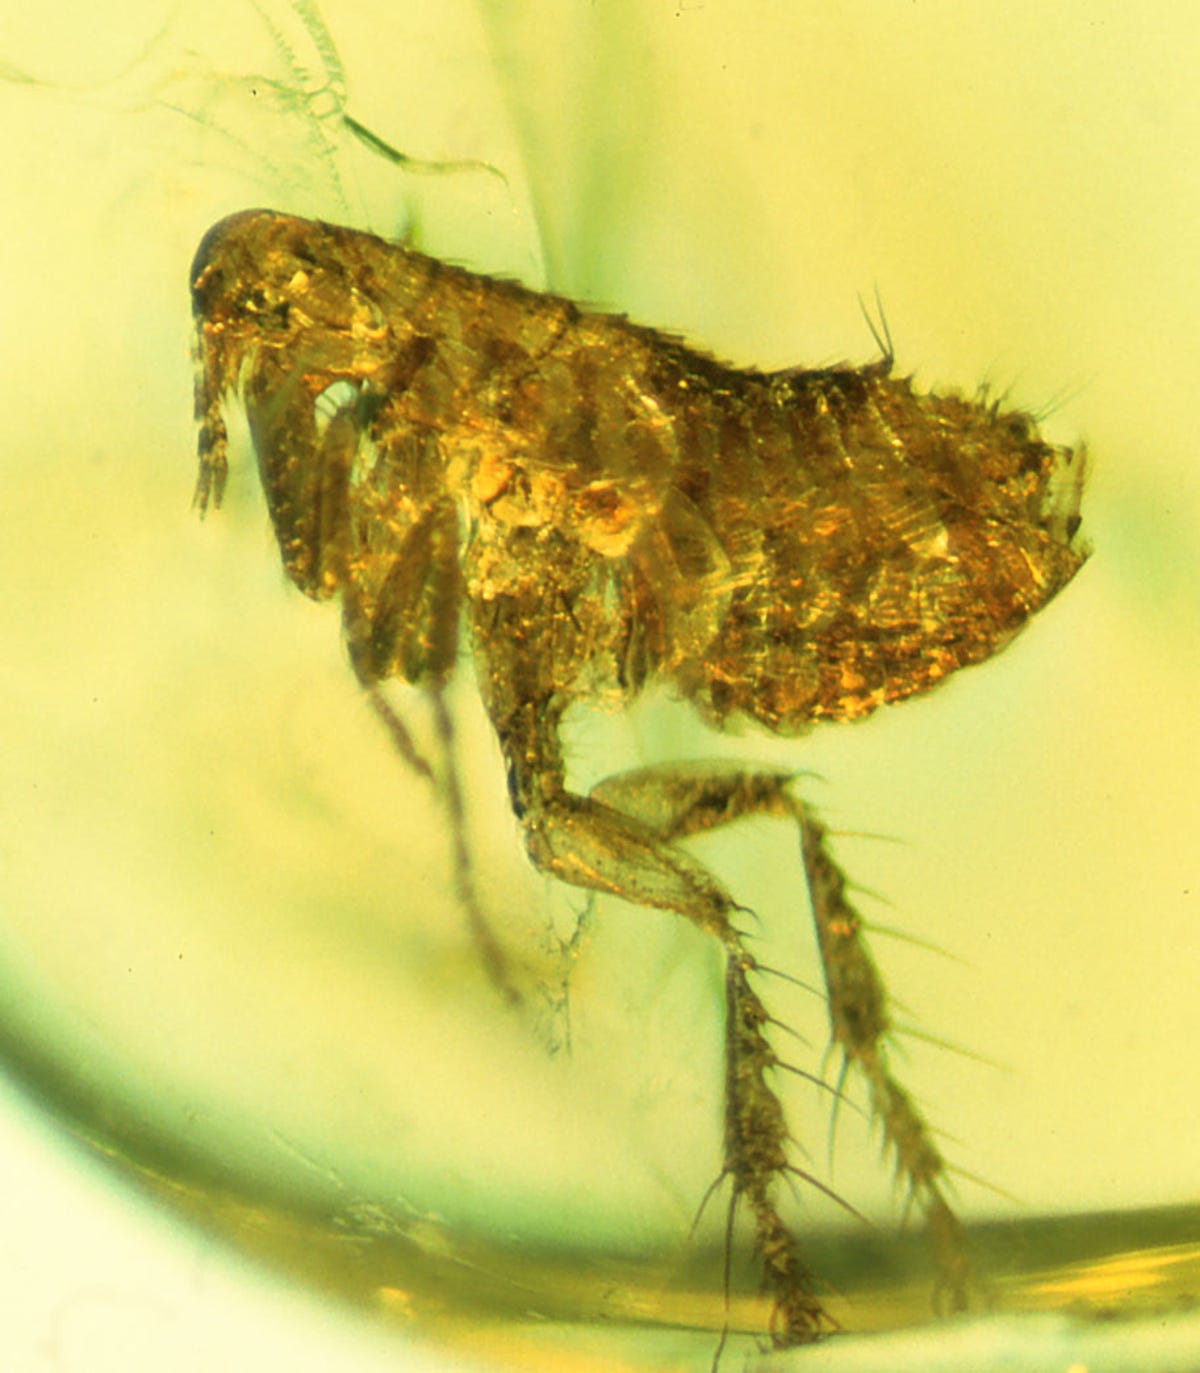 A well-preserved flea seen from the side with back jumping legs extended.